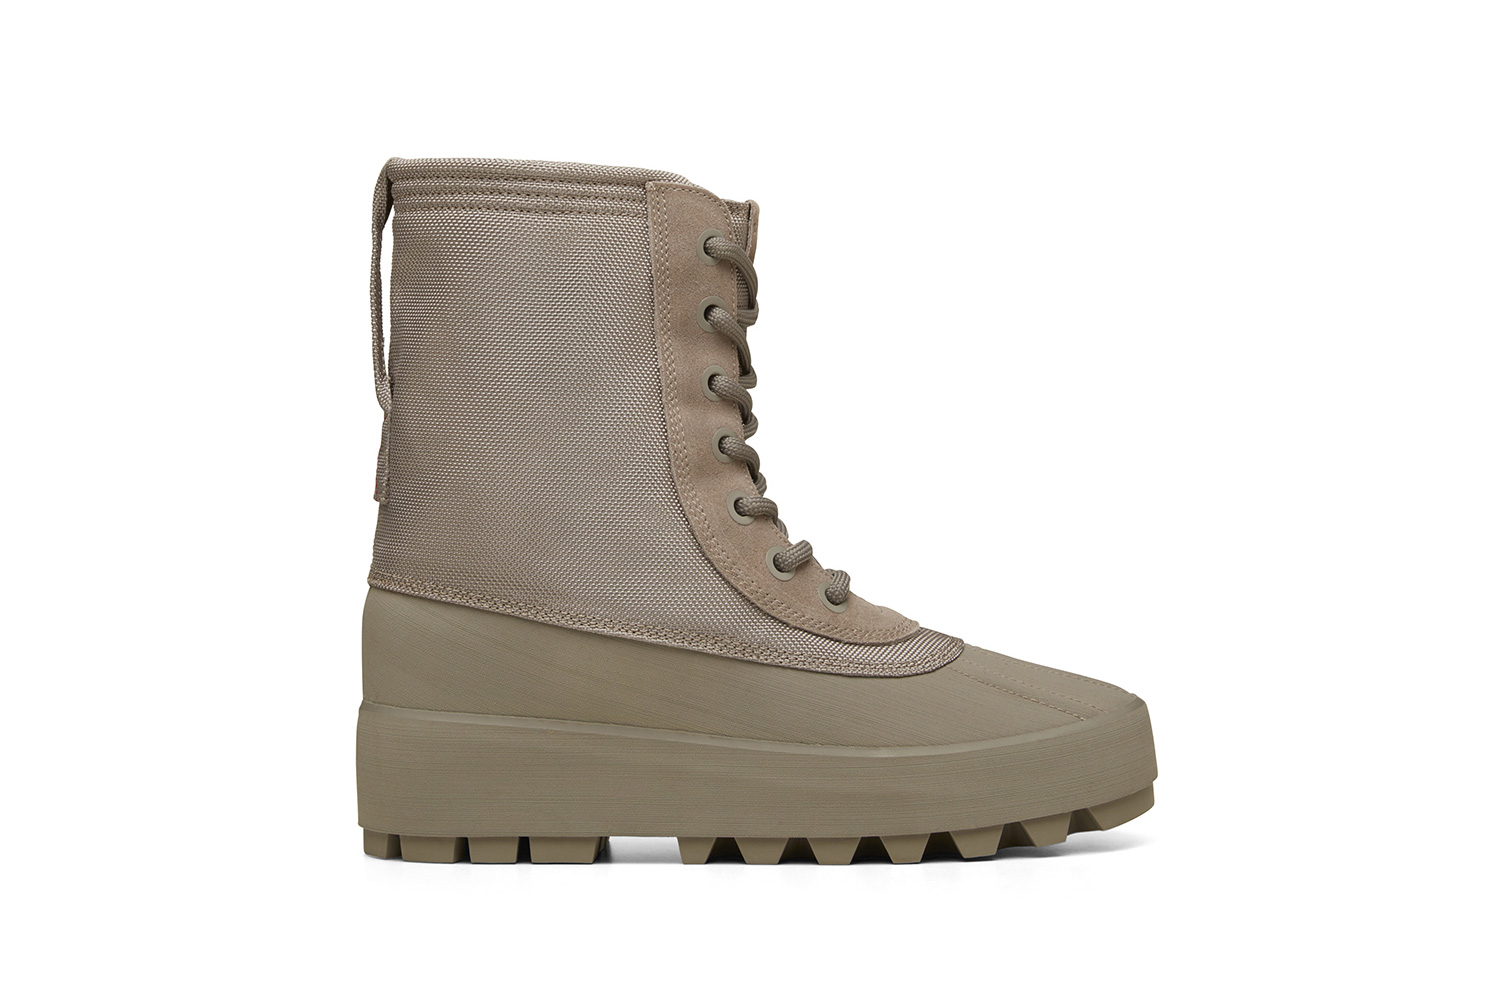 A Full Look at the Yeezy 950 Duck Boot 